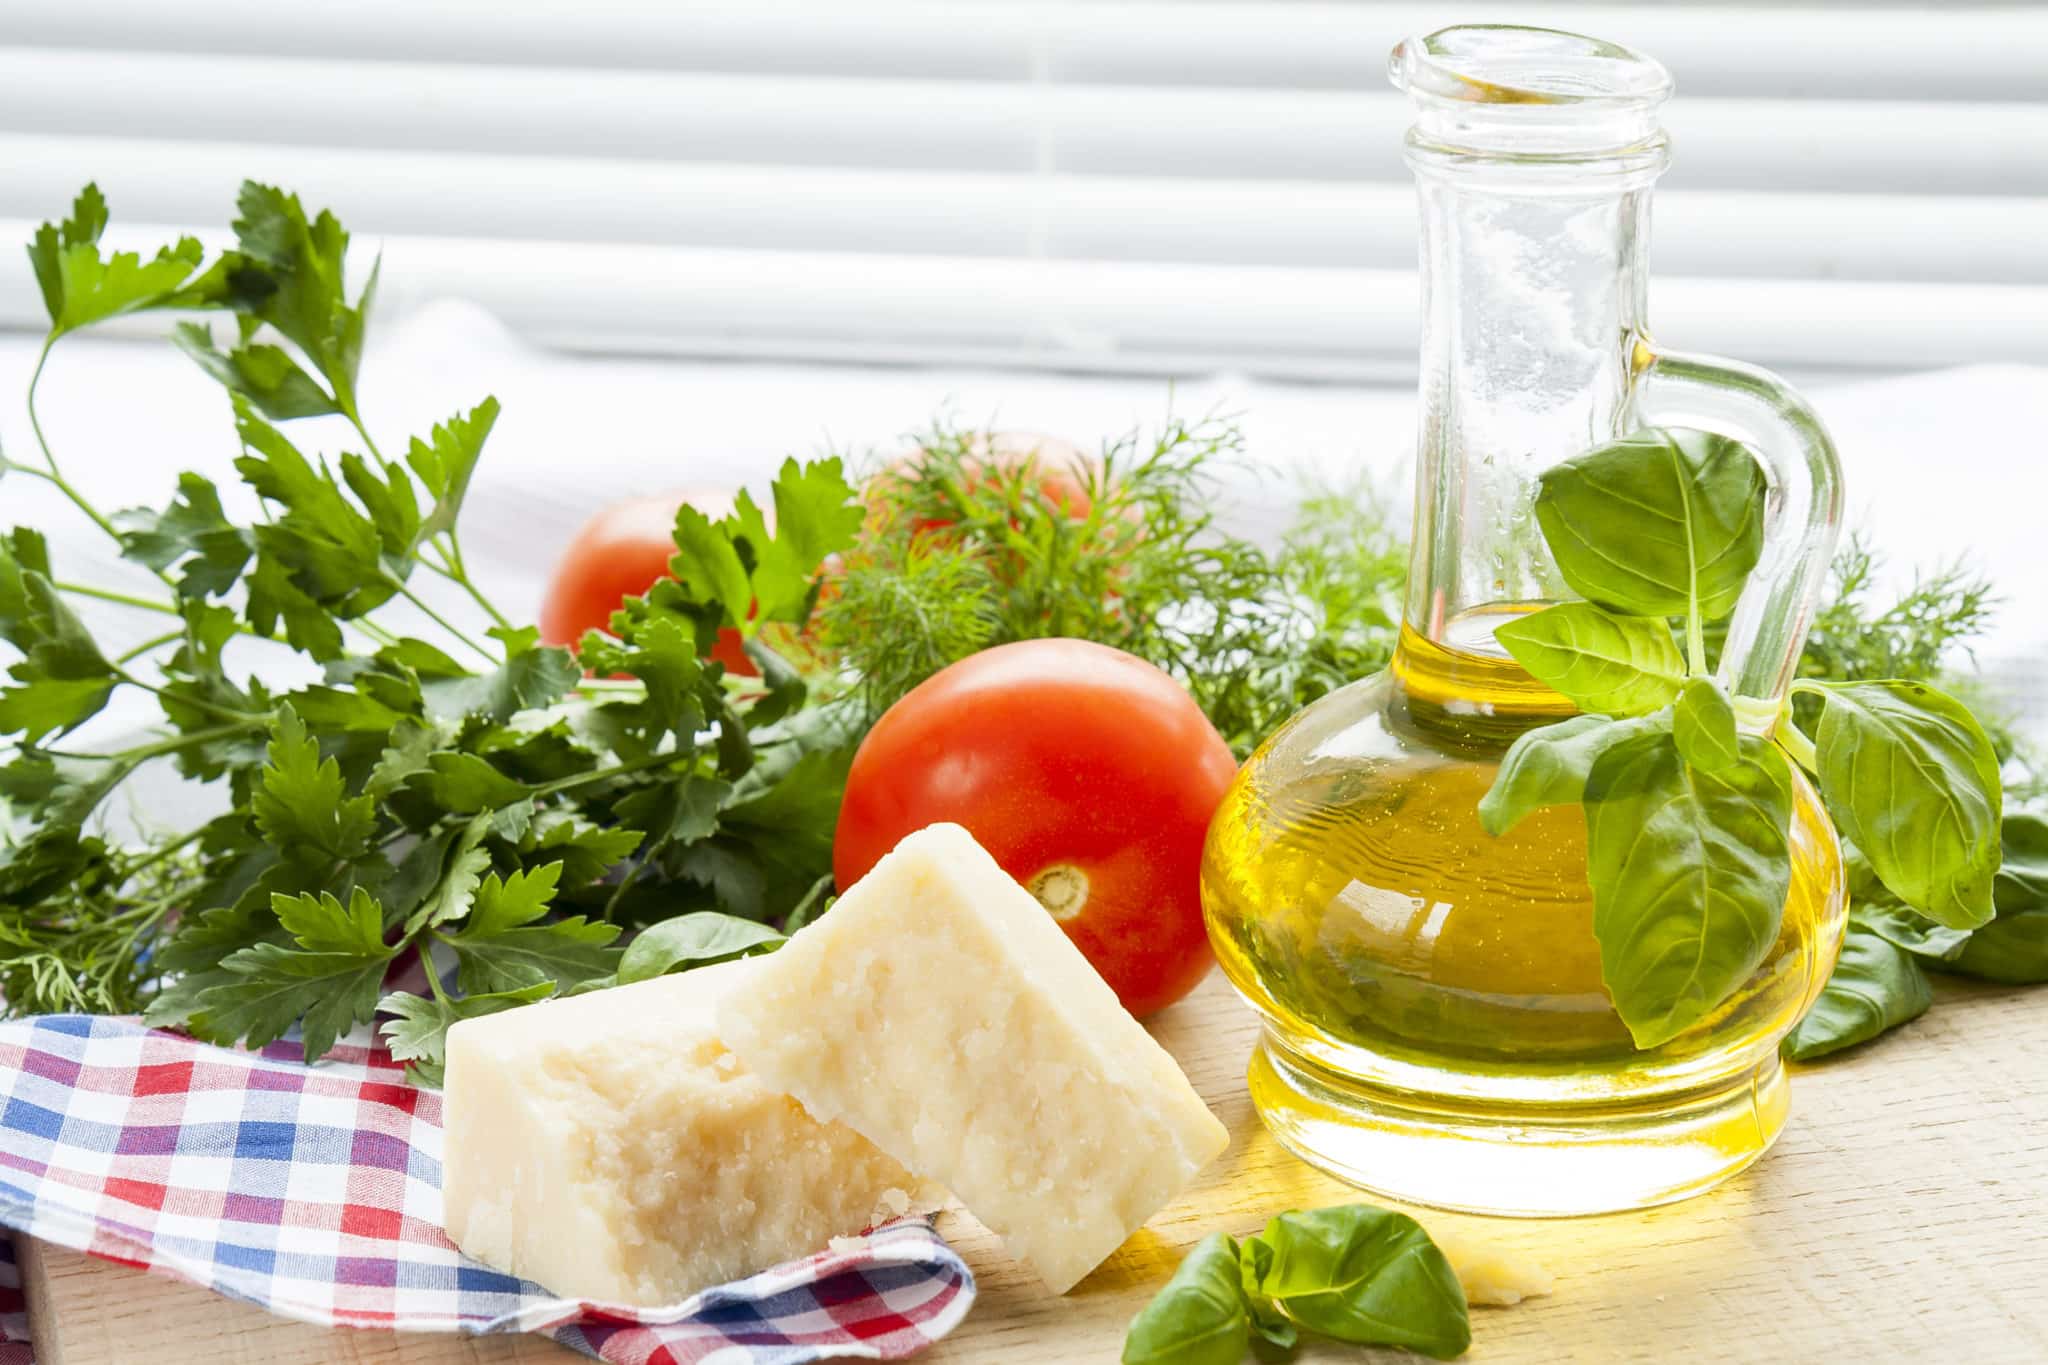 Known as the world's healthiest diet, get started with the Mediterranean diet with these super yummy recipes.